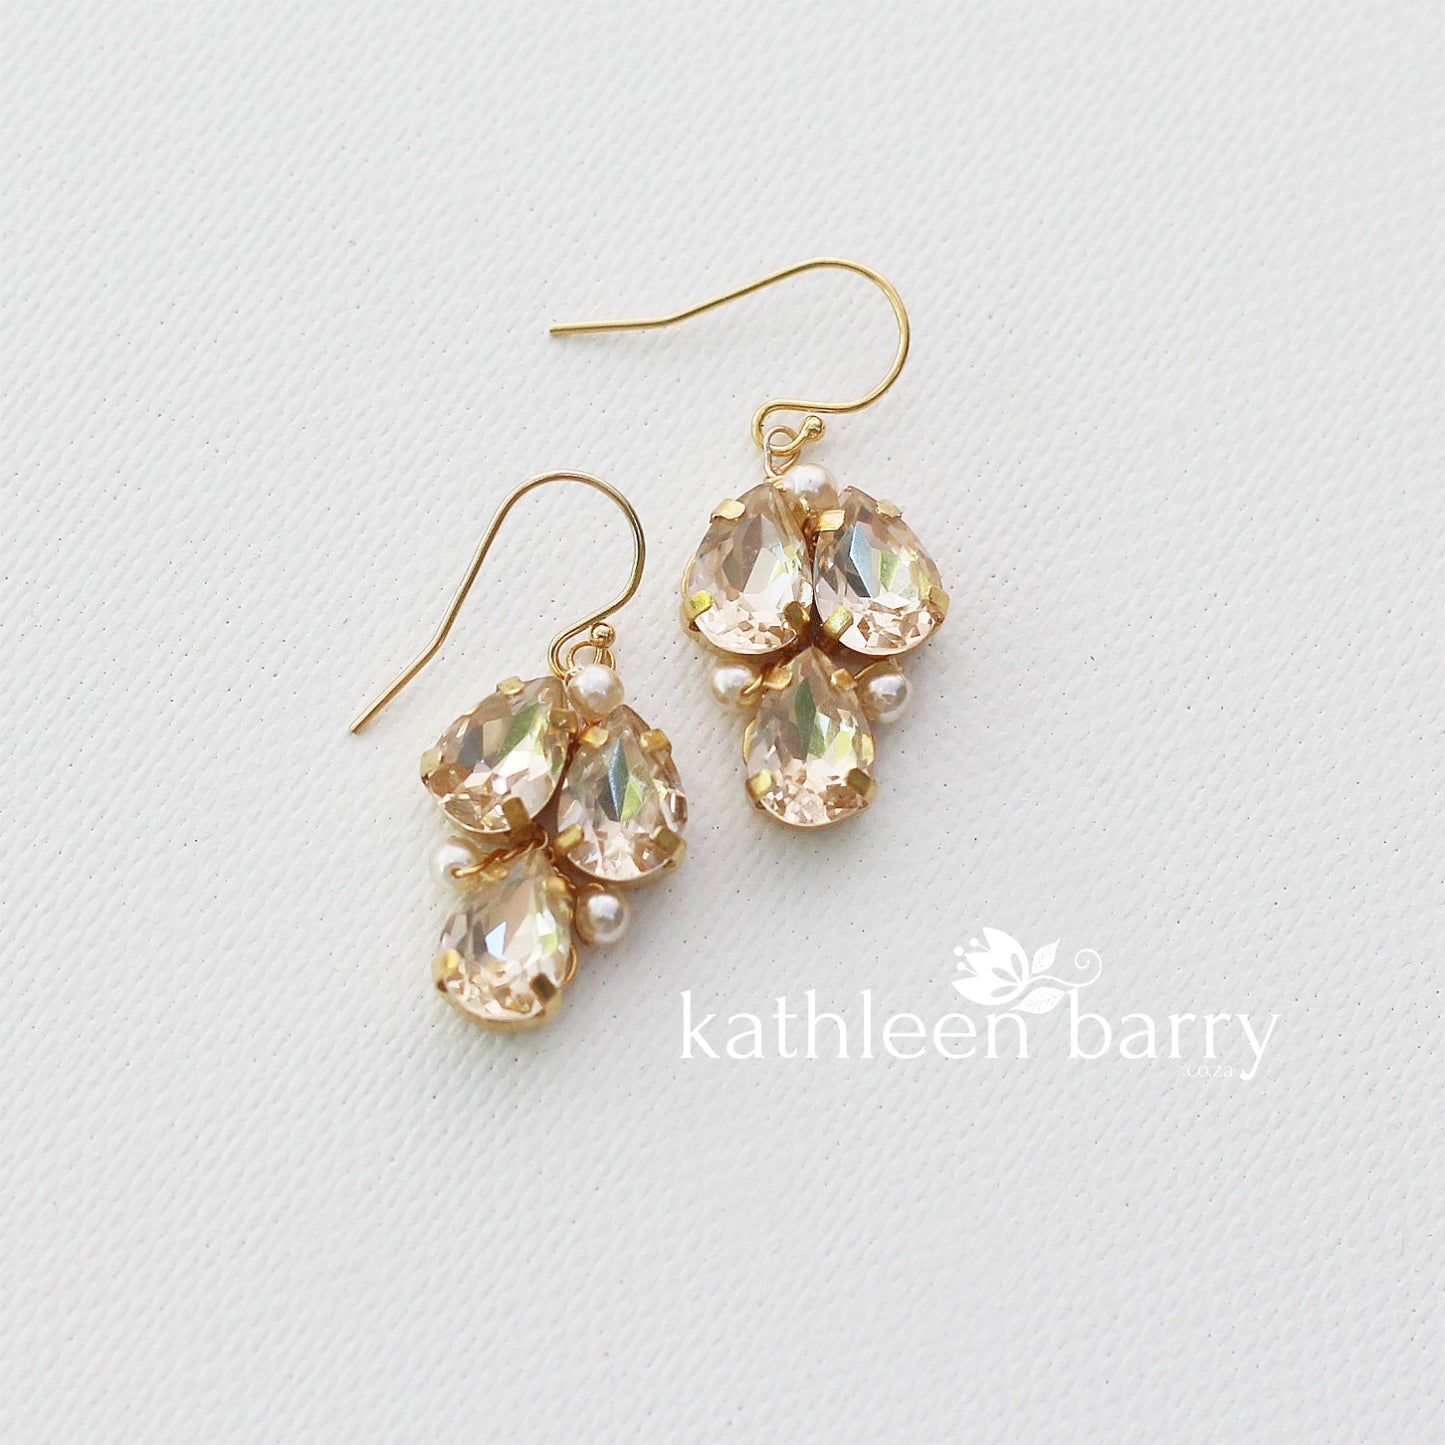 Jessica Rhinestone Pearl Earrings - Champagne Rose gold, gold or silver - Rhinestone colors available